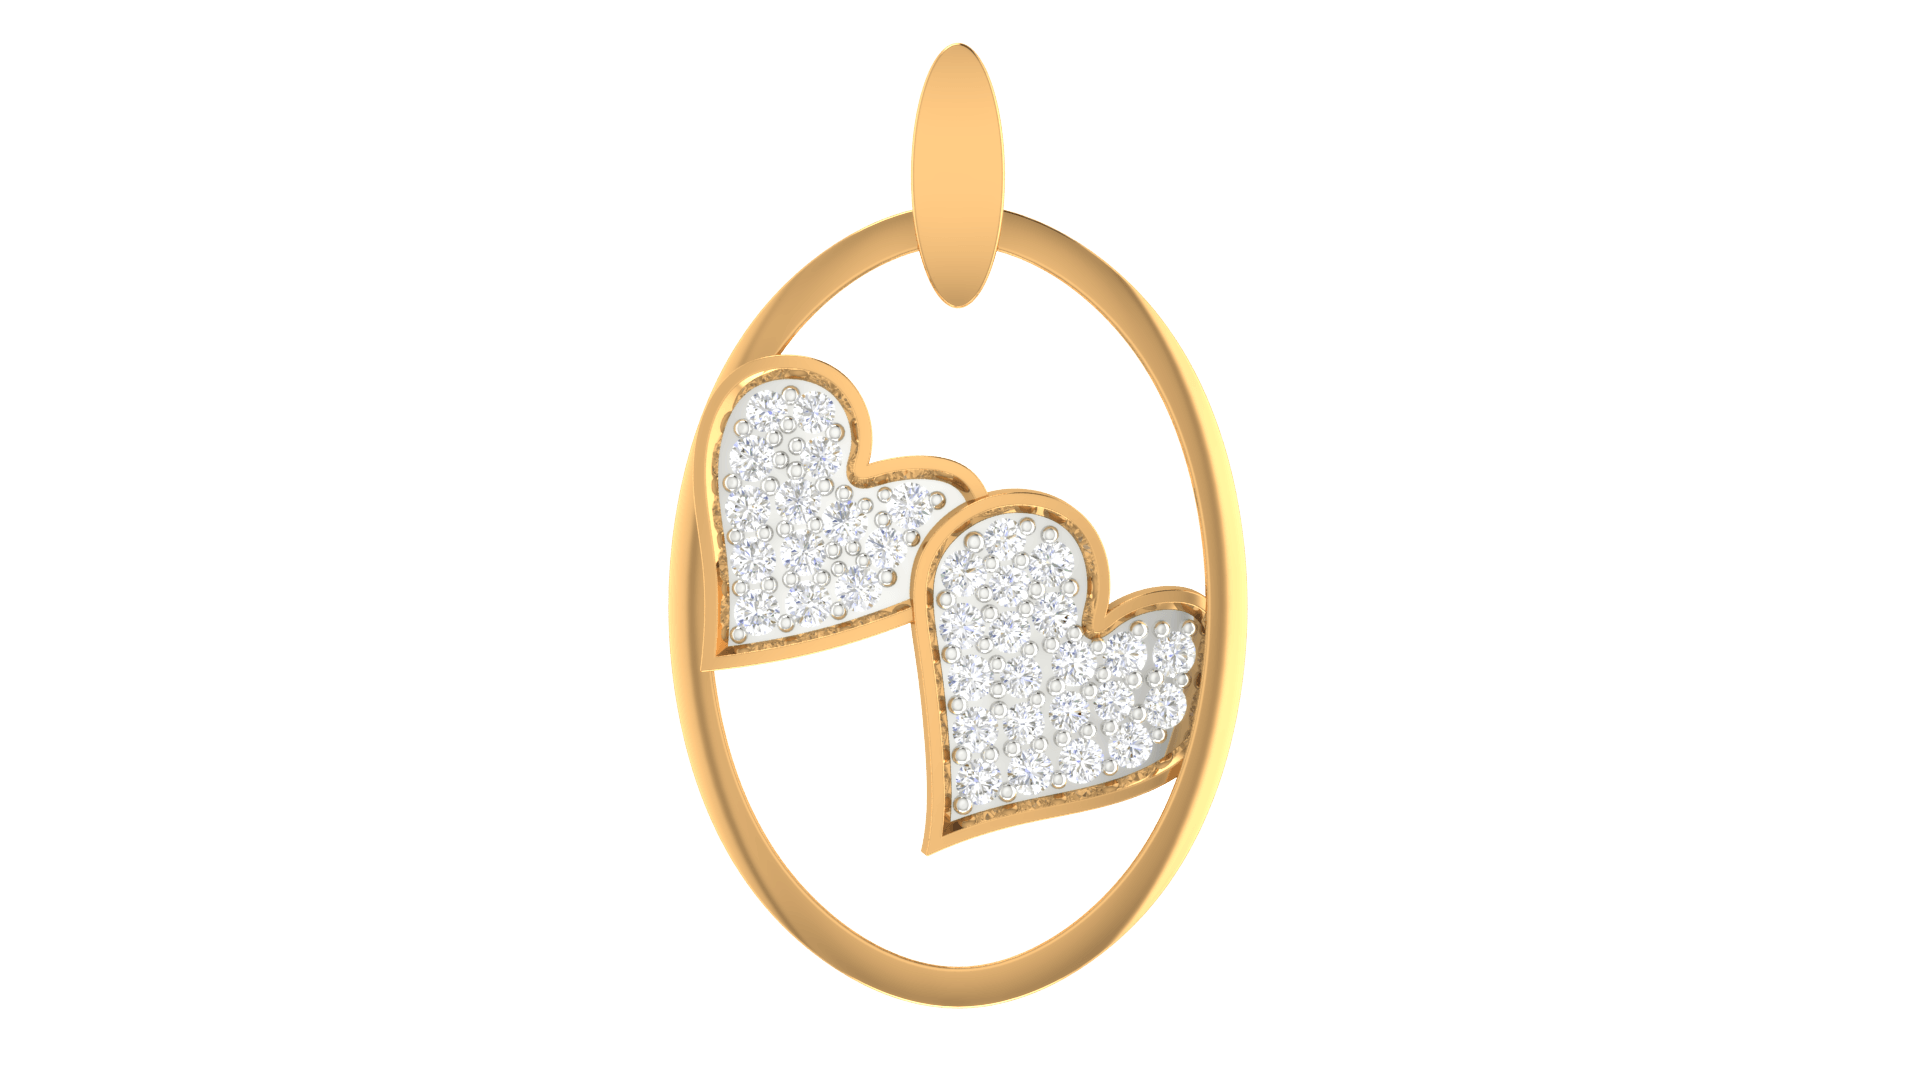 Auory 925 Sterling Silver Heart Pendant AUPH-15 - Auory